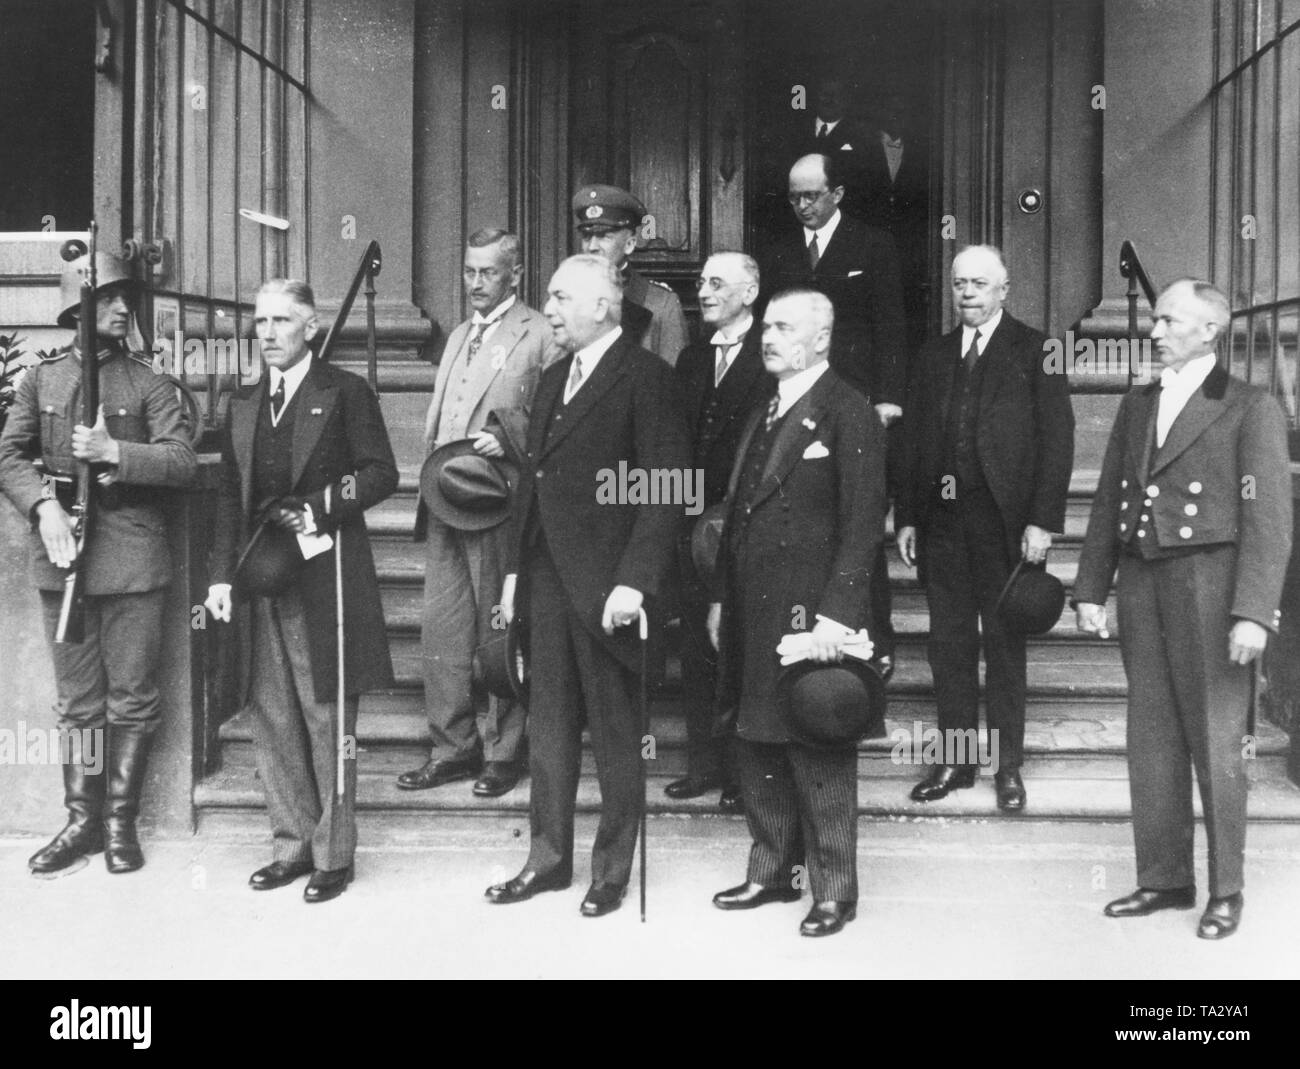 After the resignation of Chancellor von Bruening, Franz von Papen formed a new government, the so-called Cabinet of National Concentration. First row, from left: Chancellor Franz von Papen, Foreign Minister Konstantin Freiherr von Neurath, Food and Agriculture Minister Magnus Freiherr von Braun. Second row: Minister of Justice Franz Guertner, Defence Minister Kurt von Schleicher, Minister of the Interior Wilhelm Freiherr von Gayl, State Secretary of the Reich Chancellery Erwin Planck and Minister of Economic Affairs Hermann Warmbold. The picture was taken after the swearing in front of the Stock Photo